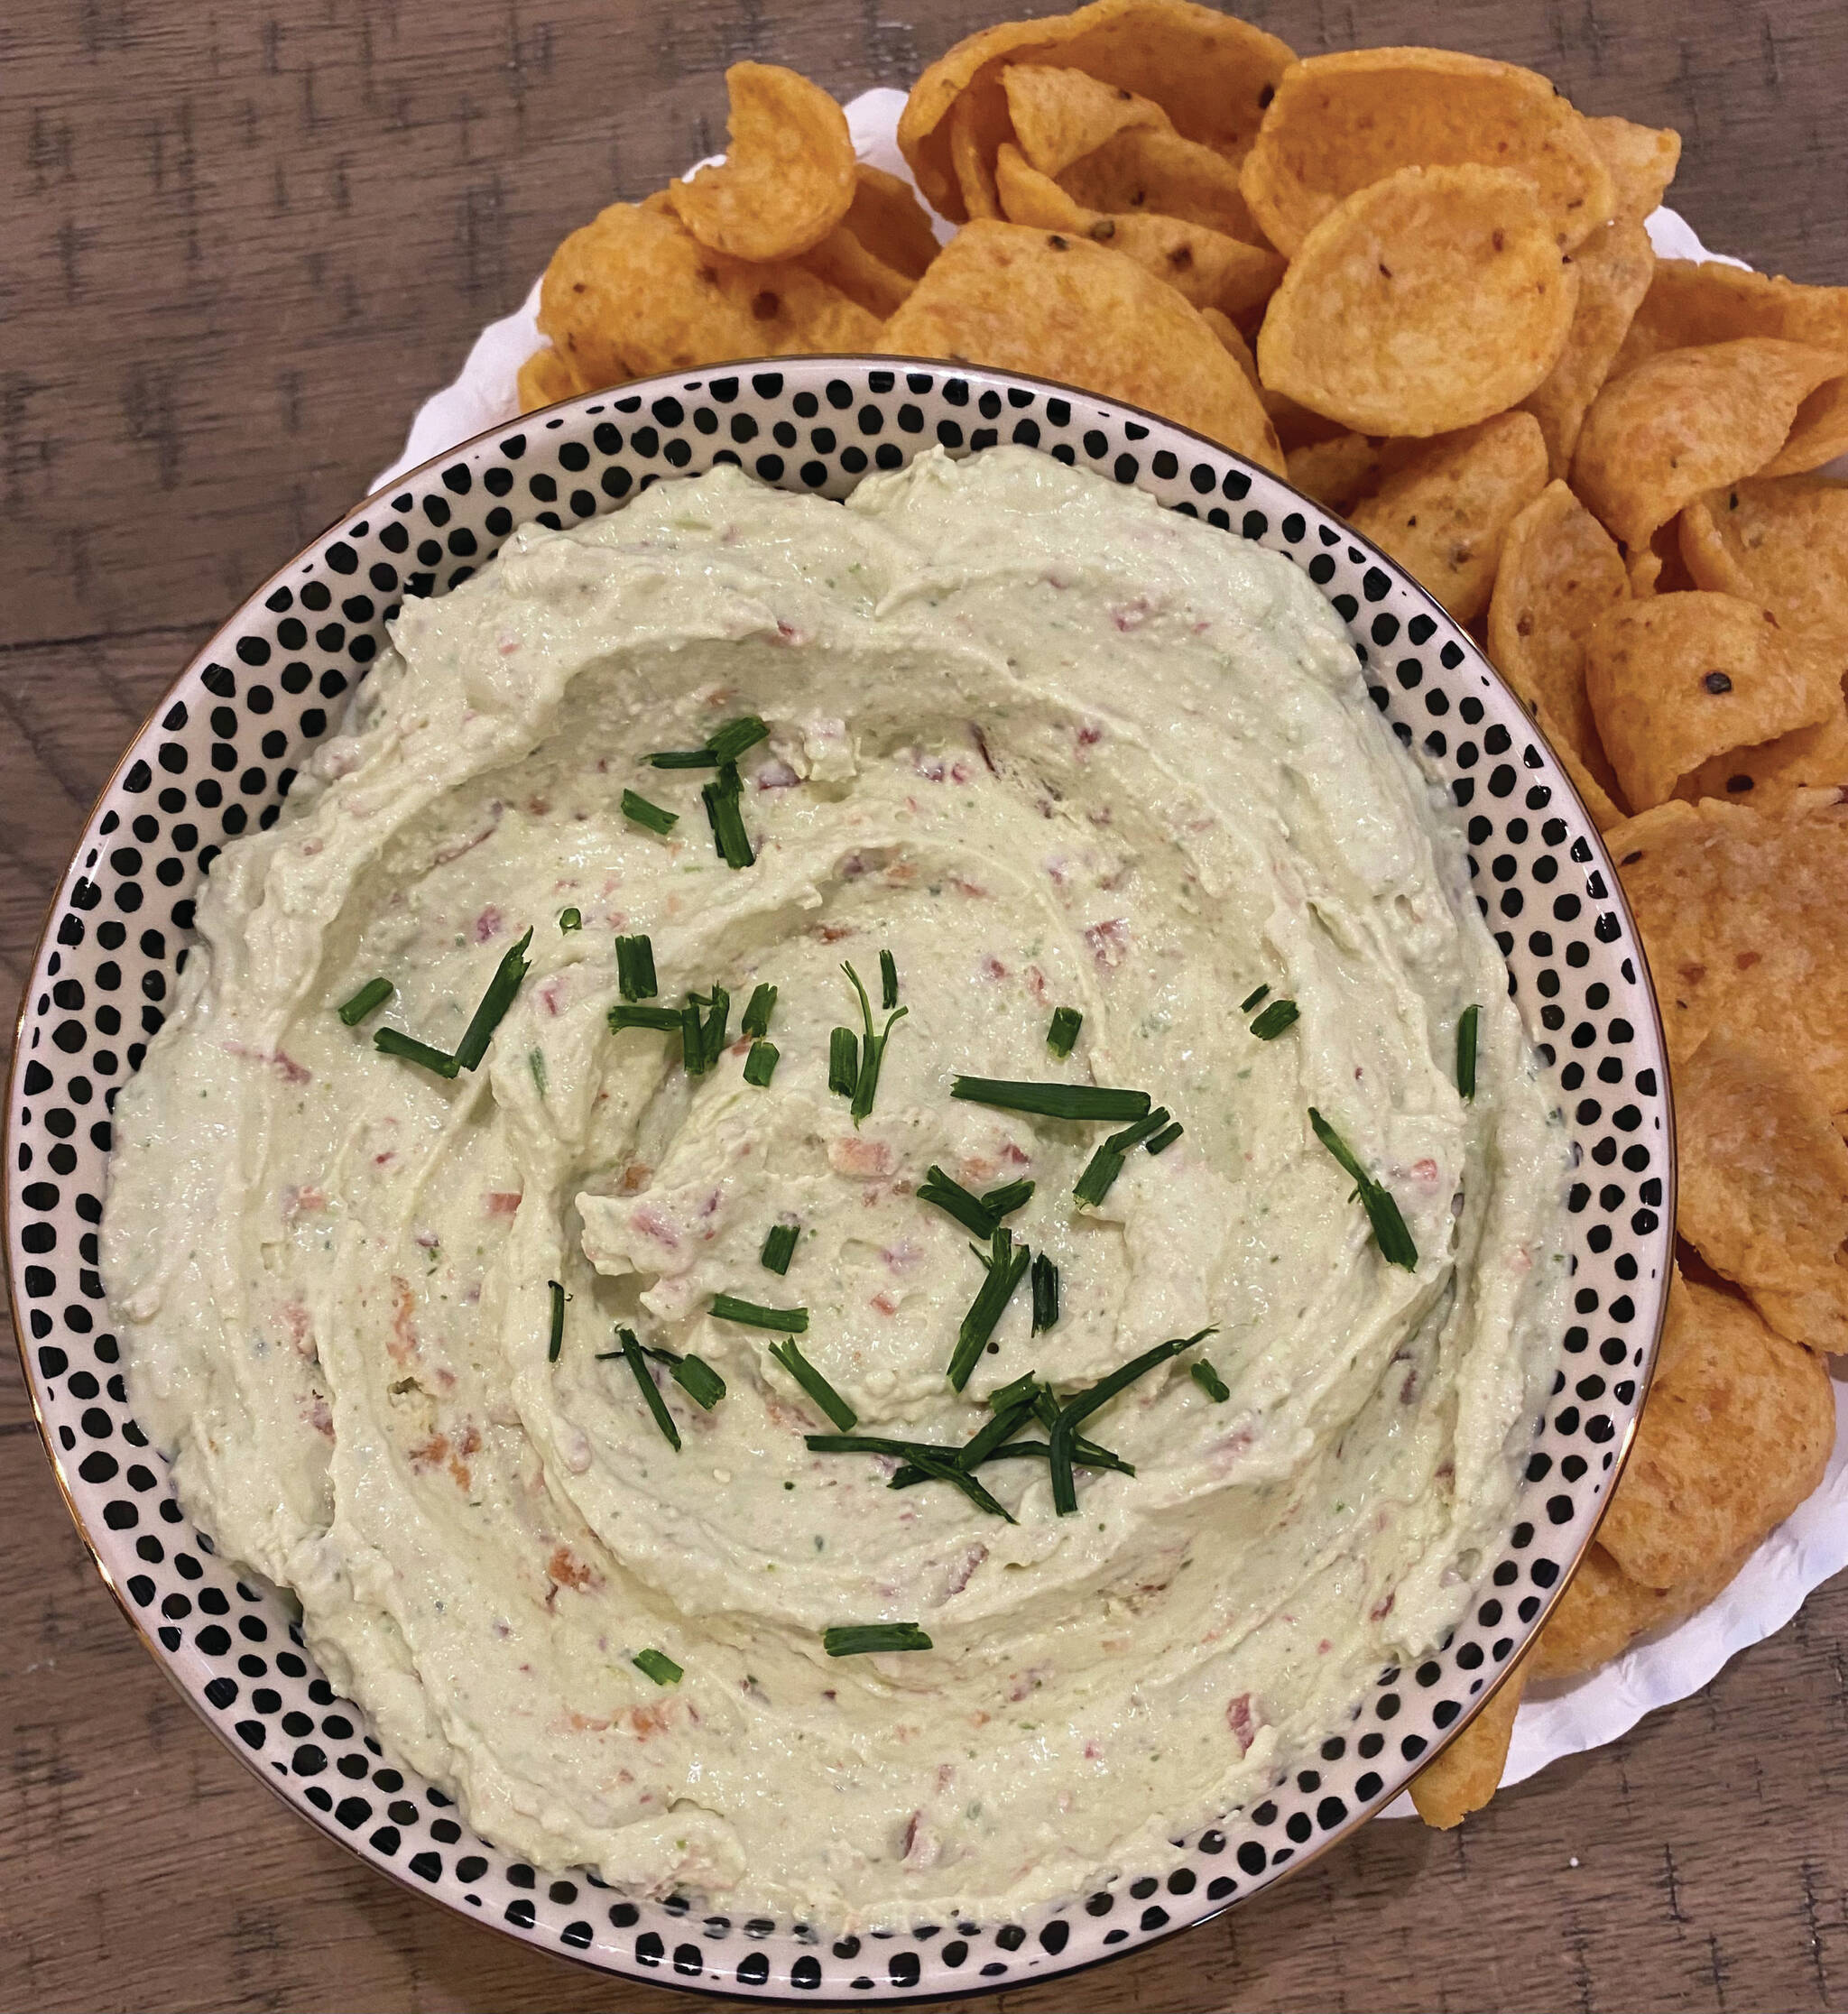 Photo by Tressa Dale/Peninsula Clarion
This jalapeno popper dip will brighten up any spread with subtle spice.